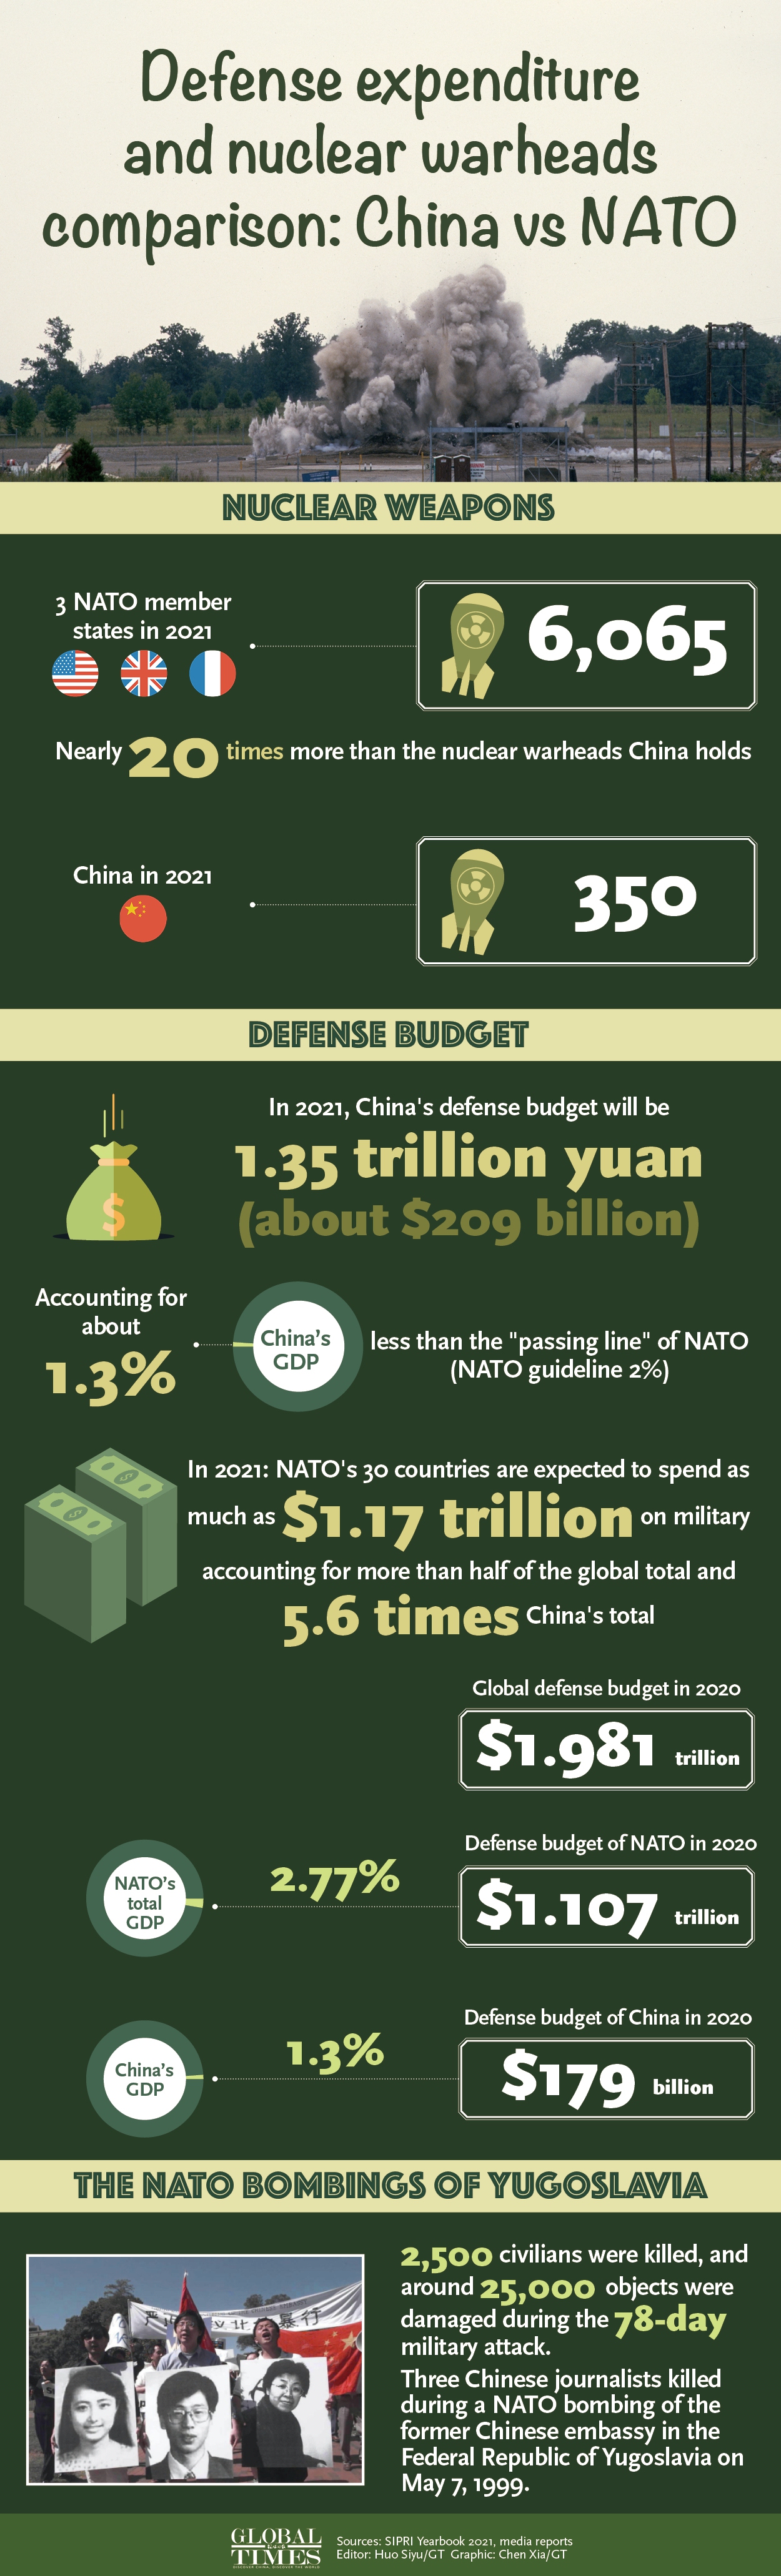 Defense expenditure and nuclear warheads comparison: China vs NATO. Infographic:Huo Siyu and Chen Xia